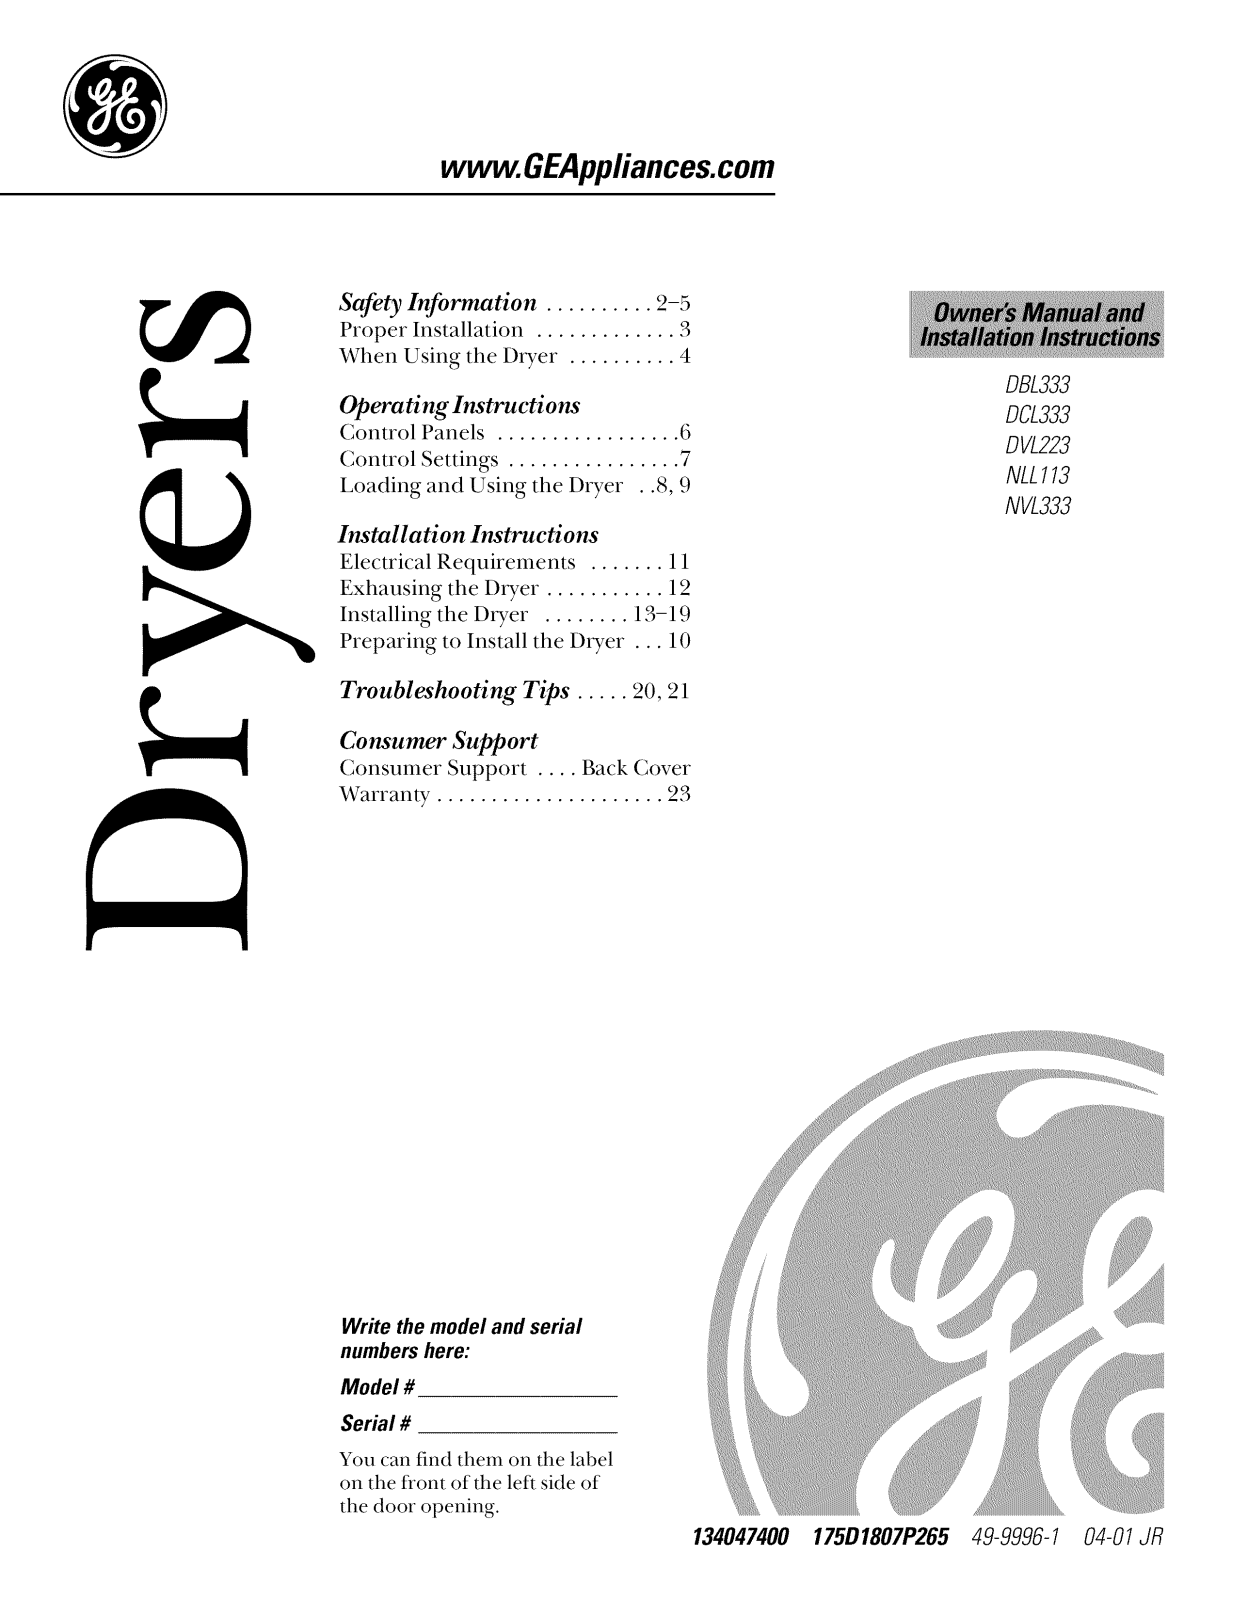 GE DVL223EY0WW, DVL223EY0AA, DVL223EB4WW, DCL333EY0WW, DCL333EY0AA Owner’s Manual